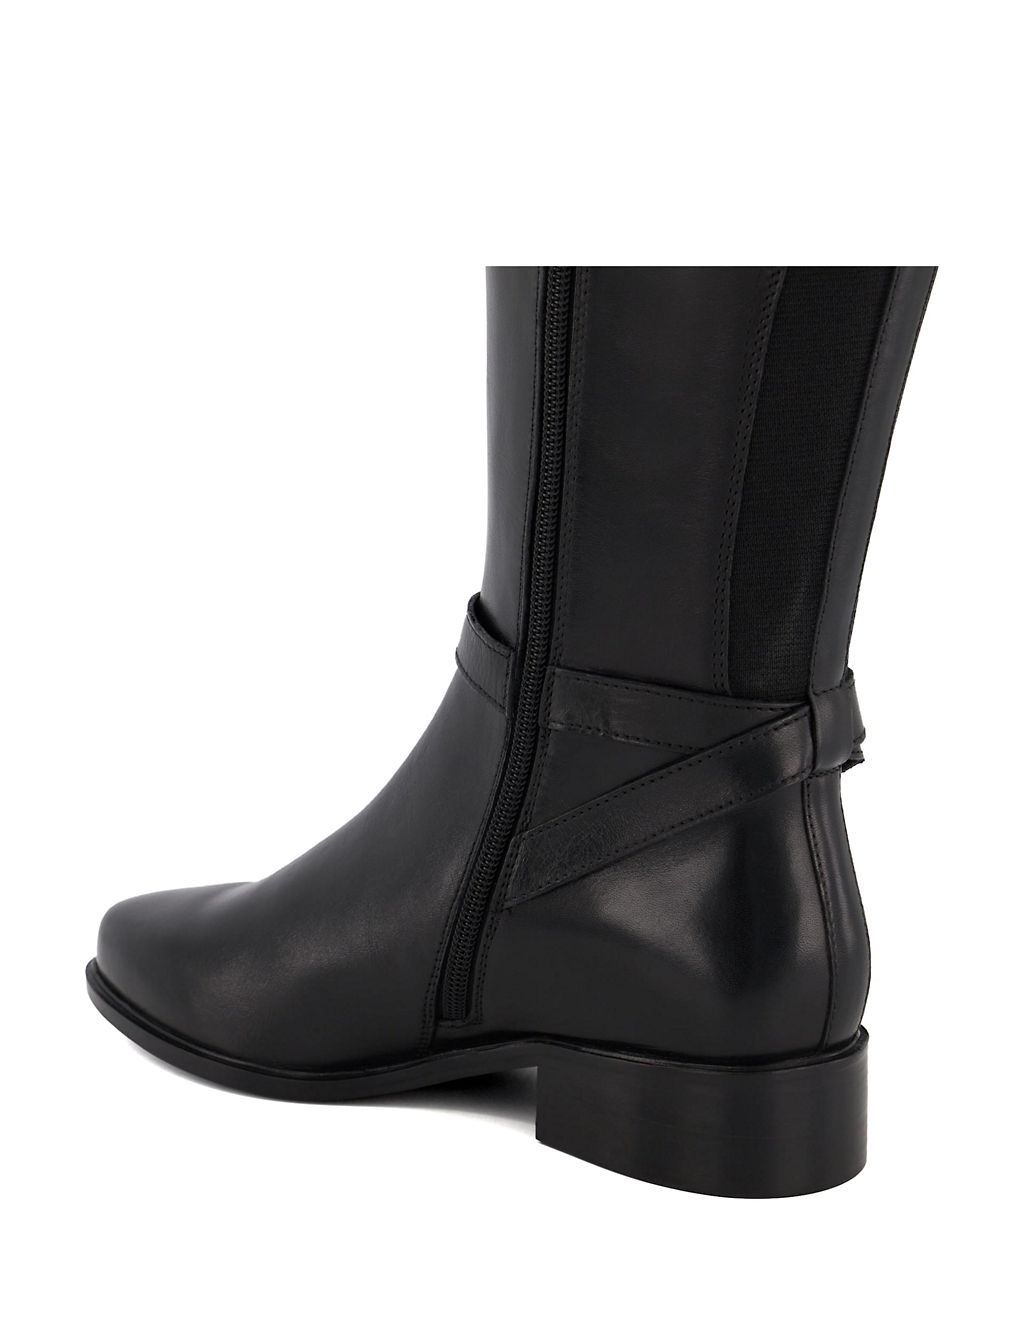 Wide Fit Leather Buckle Knee High Boots 4 of 5